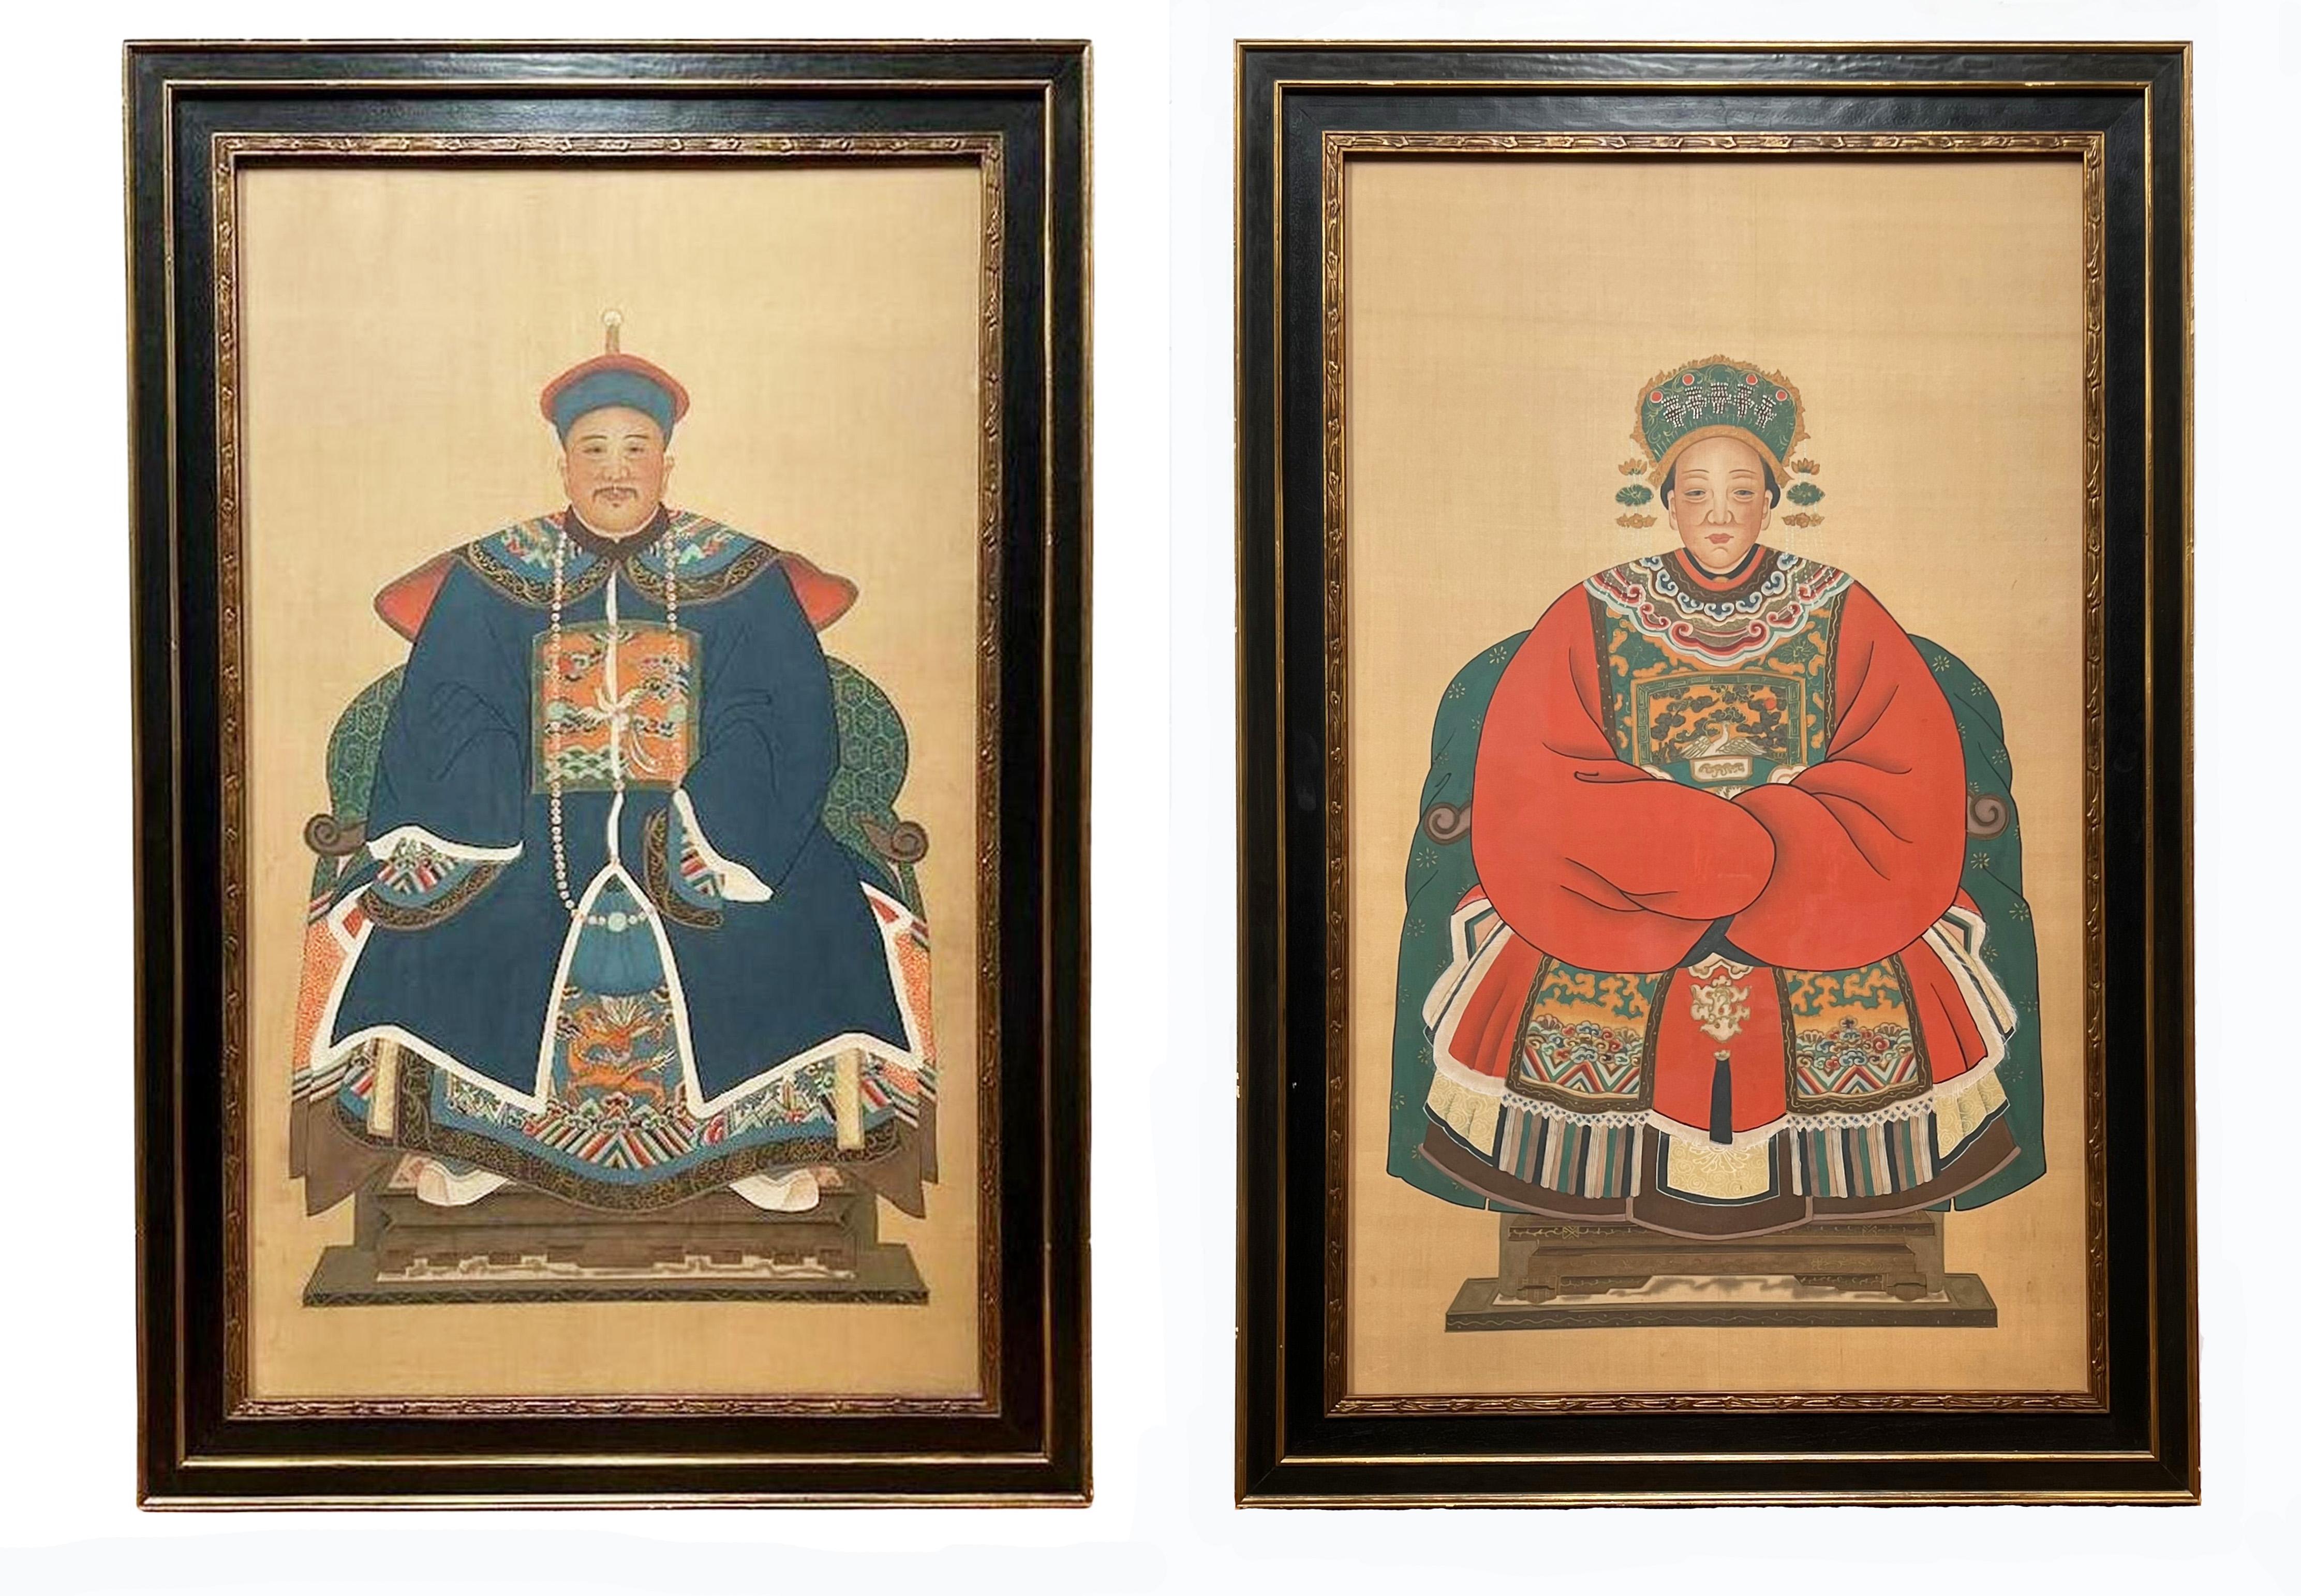 Chinese Qing Dynasty Ancestor Portraits, Senior Official Ninth Rank - A Pair - Art by Unknown